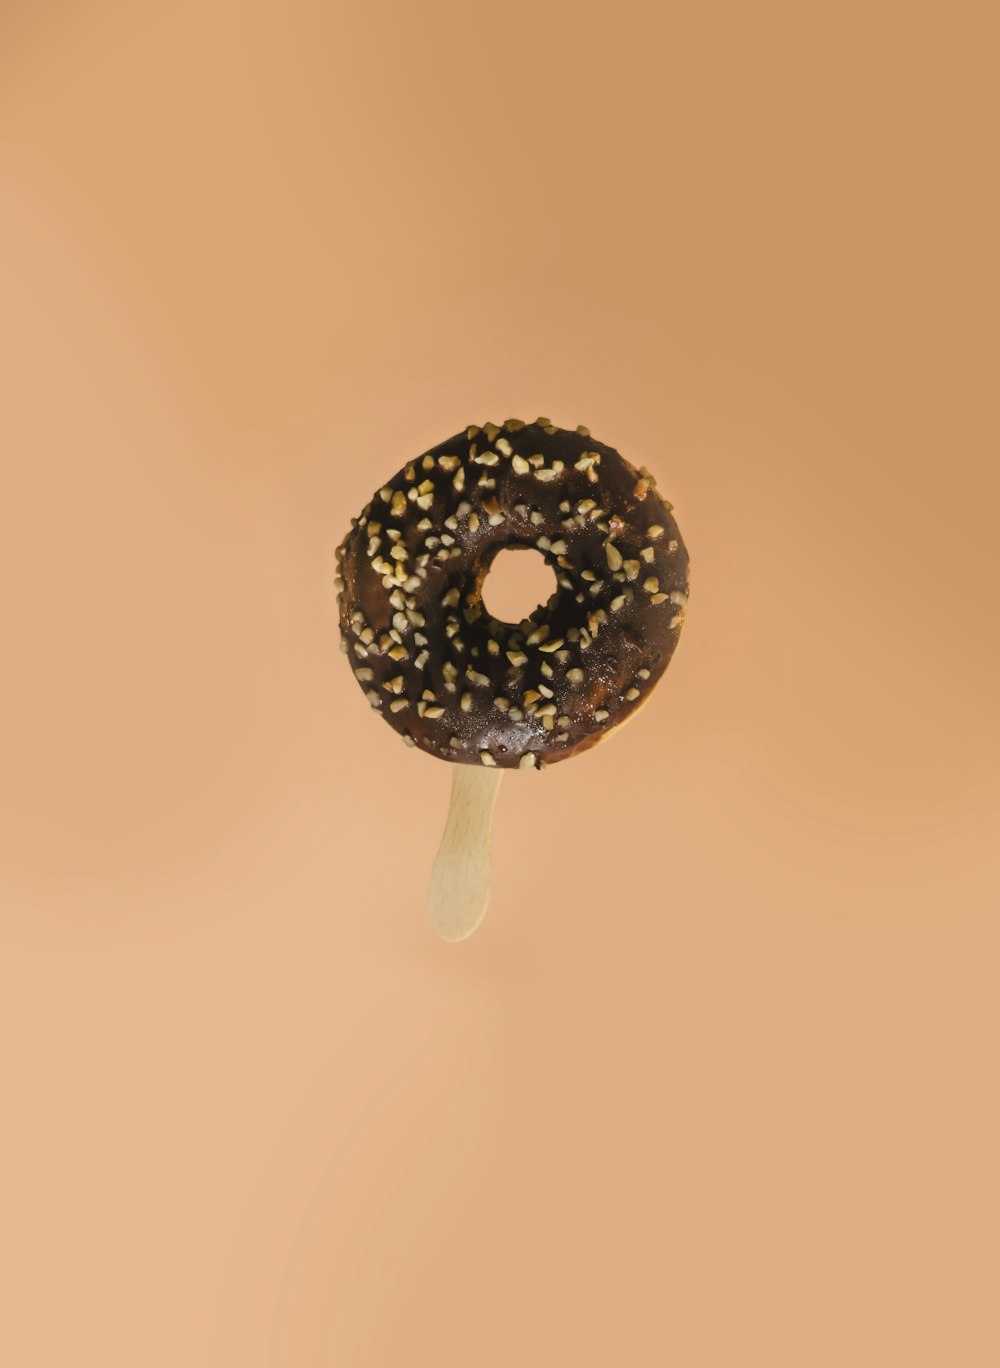 a chocolate donut with sprinkles on a stick